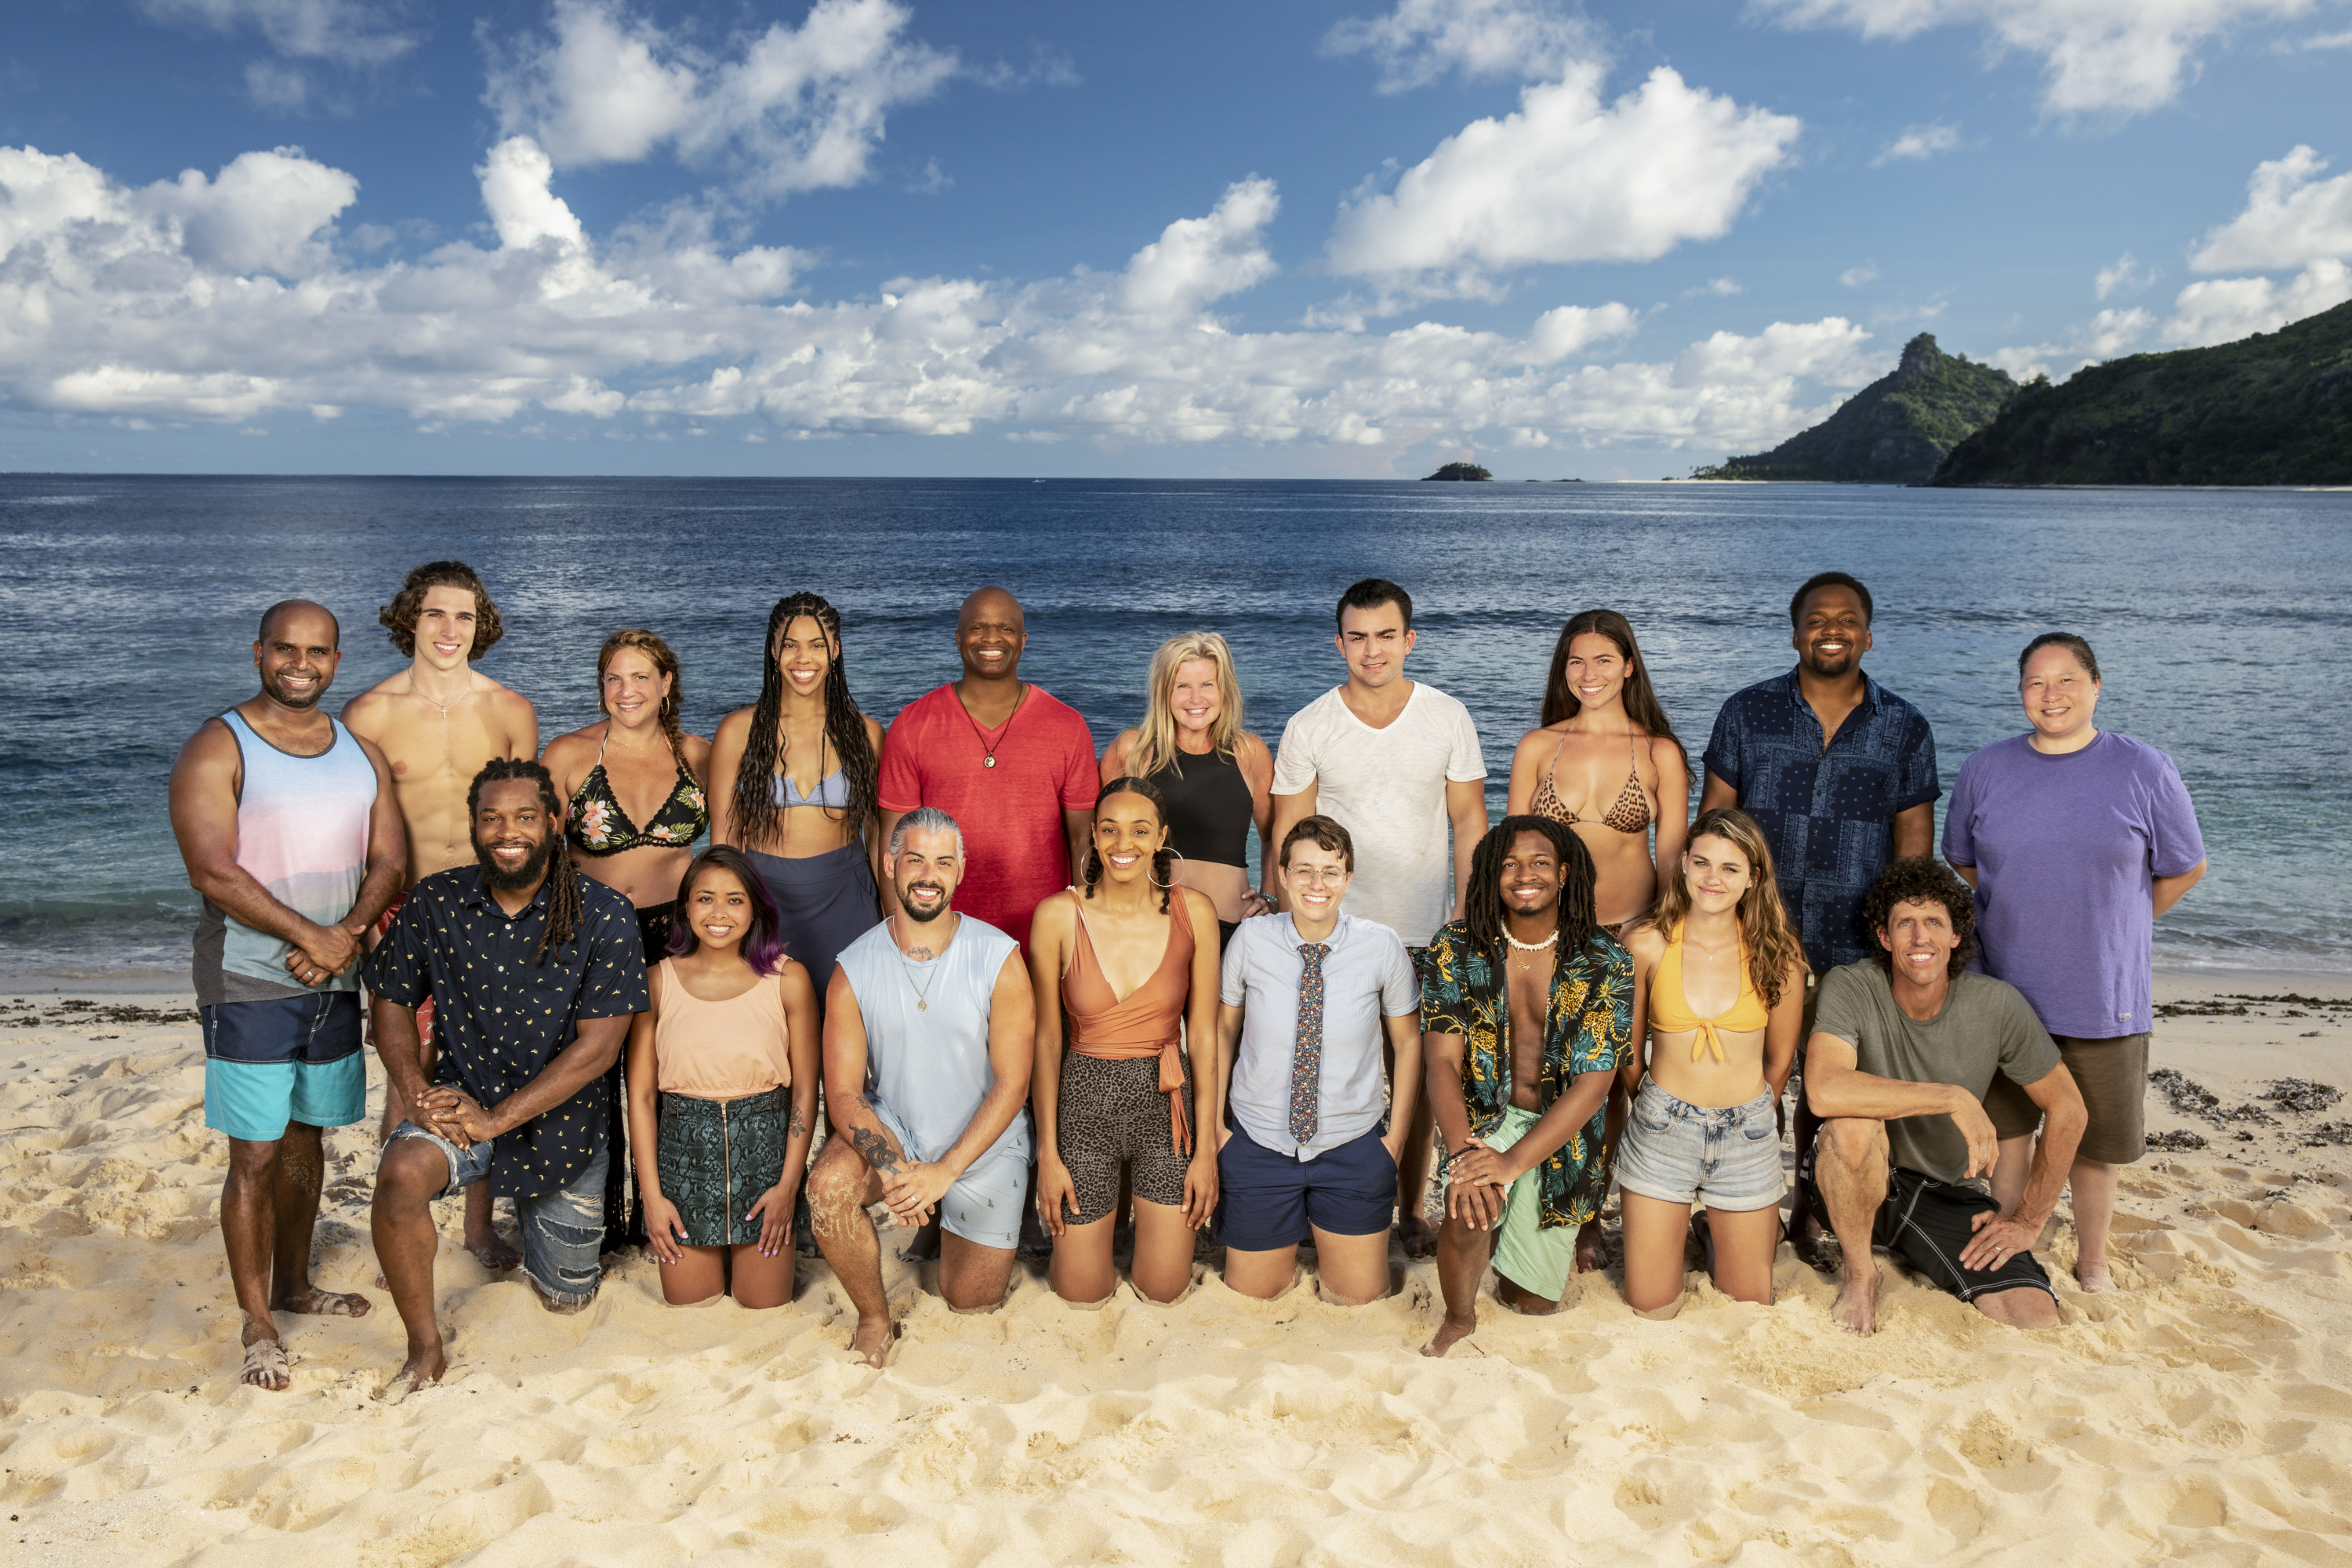 The 18 cast members of 'Survivor' 41 pose together for a group picture on the beach. Seven contestants stand in the back row and the other seven kneel in front of them.